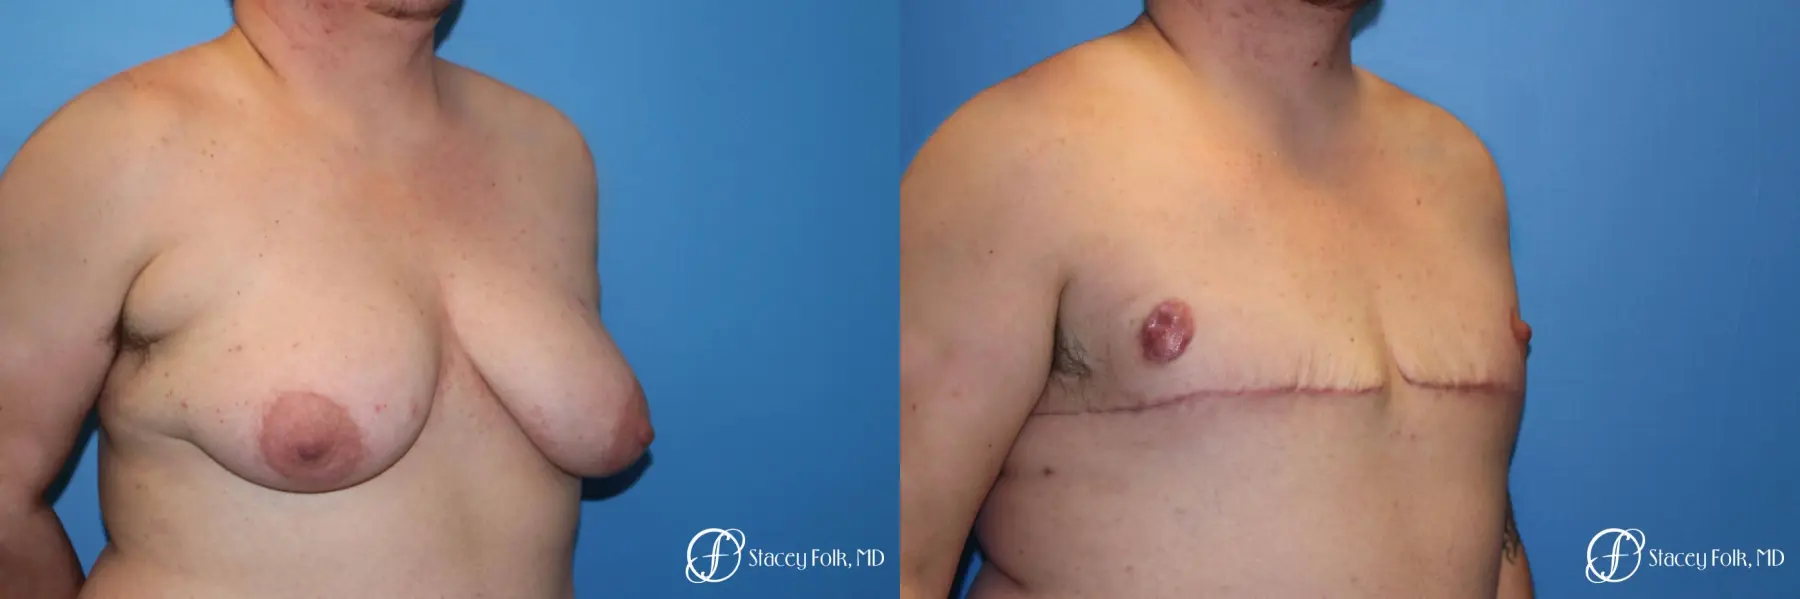 Denver FTM Female to male top surgery 5253 - Before and After 2